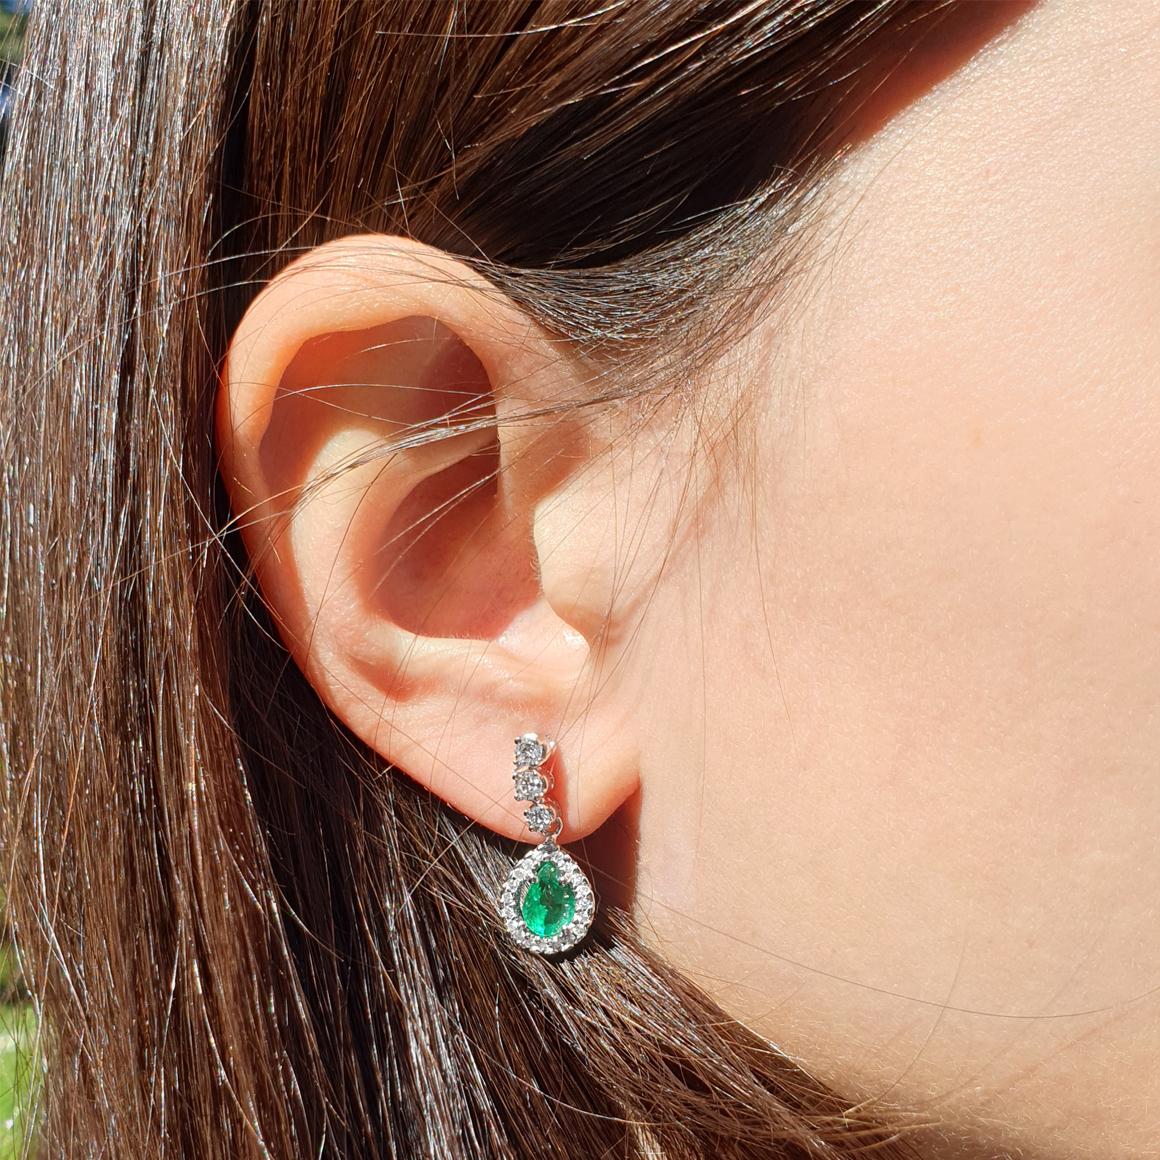  Unique piece for these elegant earrings with fantastic Zambia emerald and white diamonds made in Italy by Stanoppi Jewellery since 1948-
 Beauty never stops until perfection is reached . Precious, the emerald represents strength, vitality,